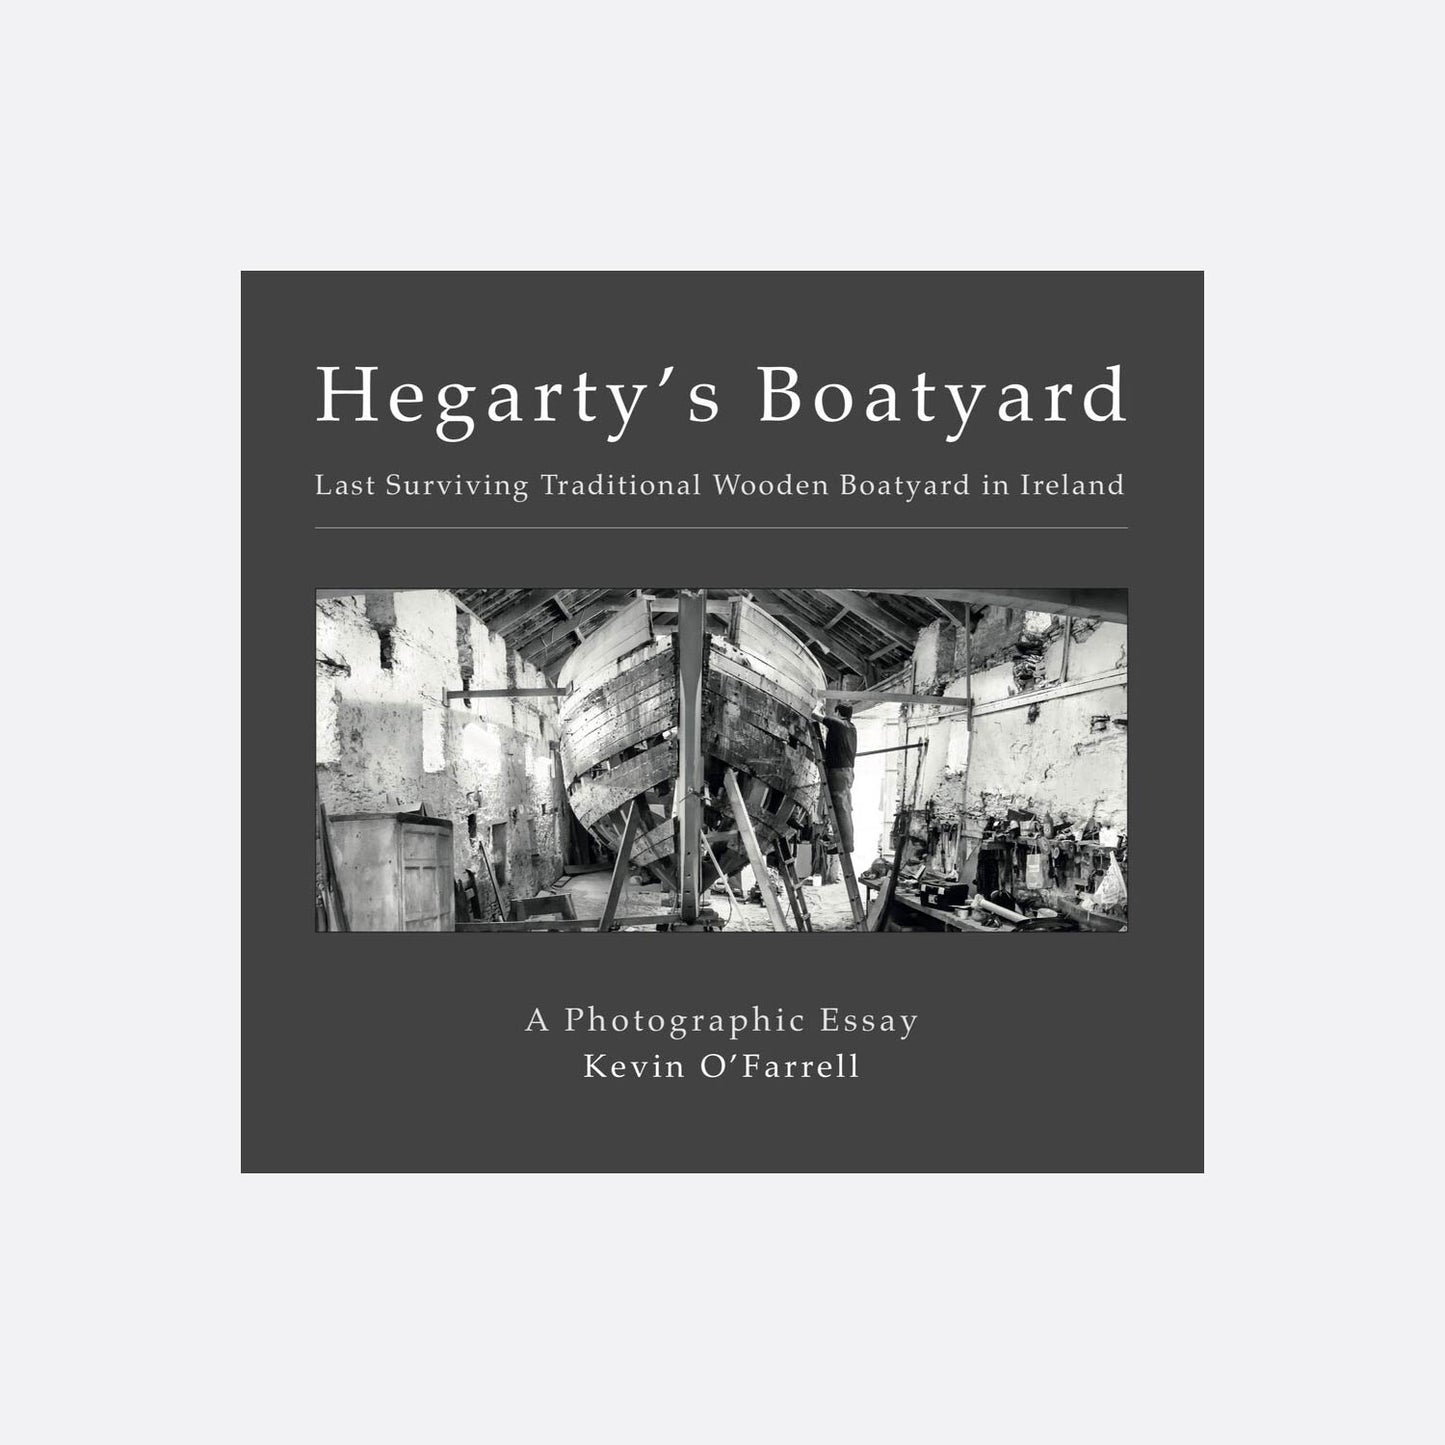 Cover of the book showing a black and white image of a boat being constructed in a workshop